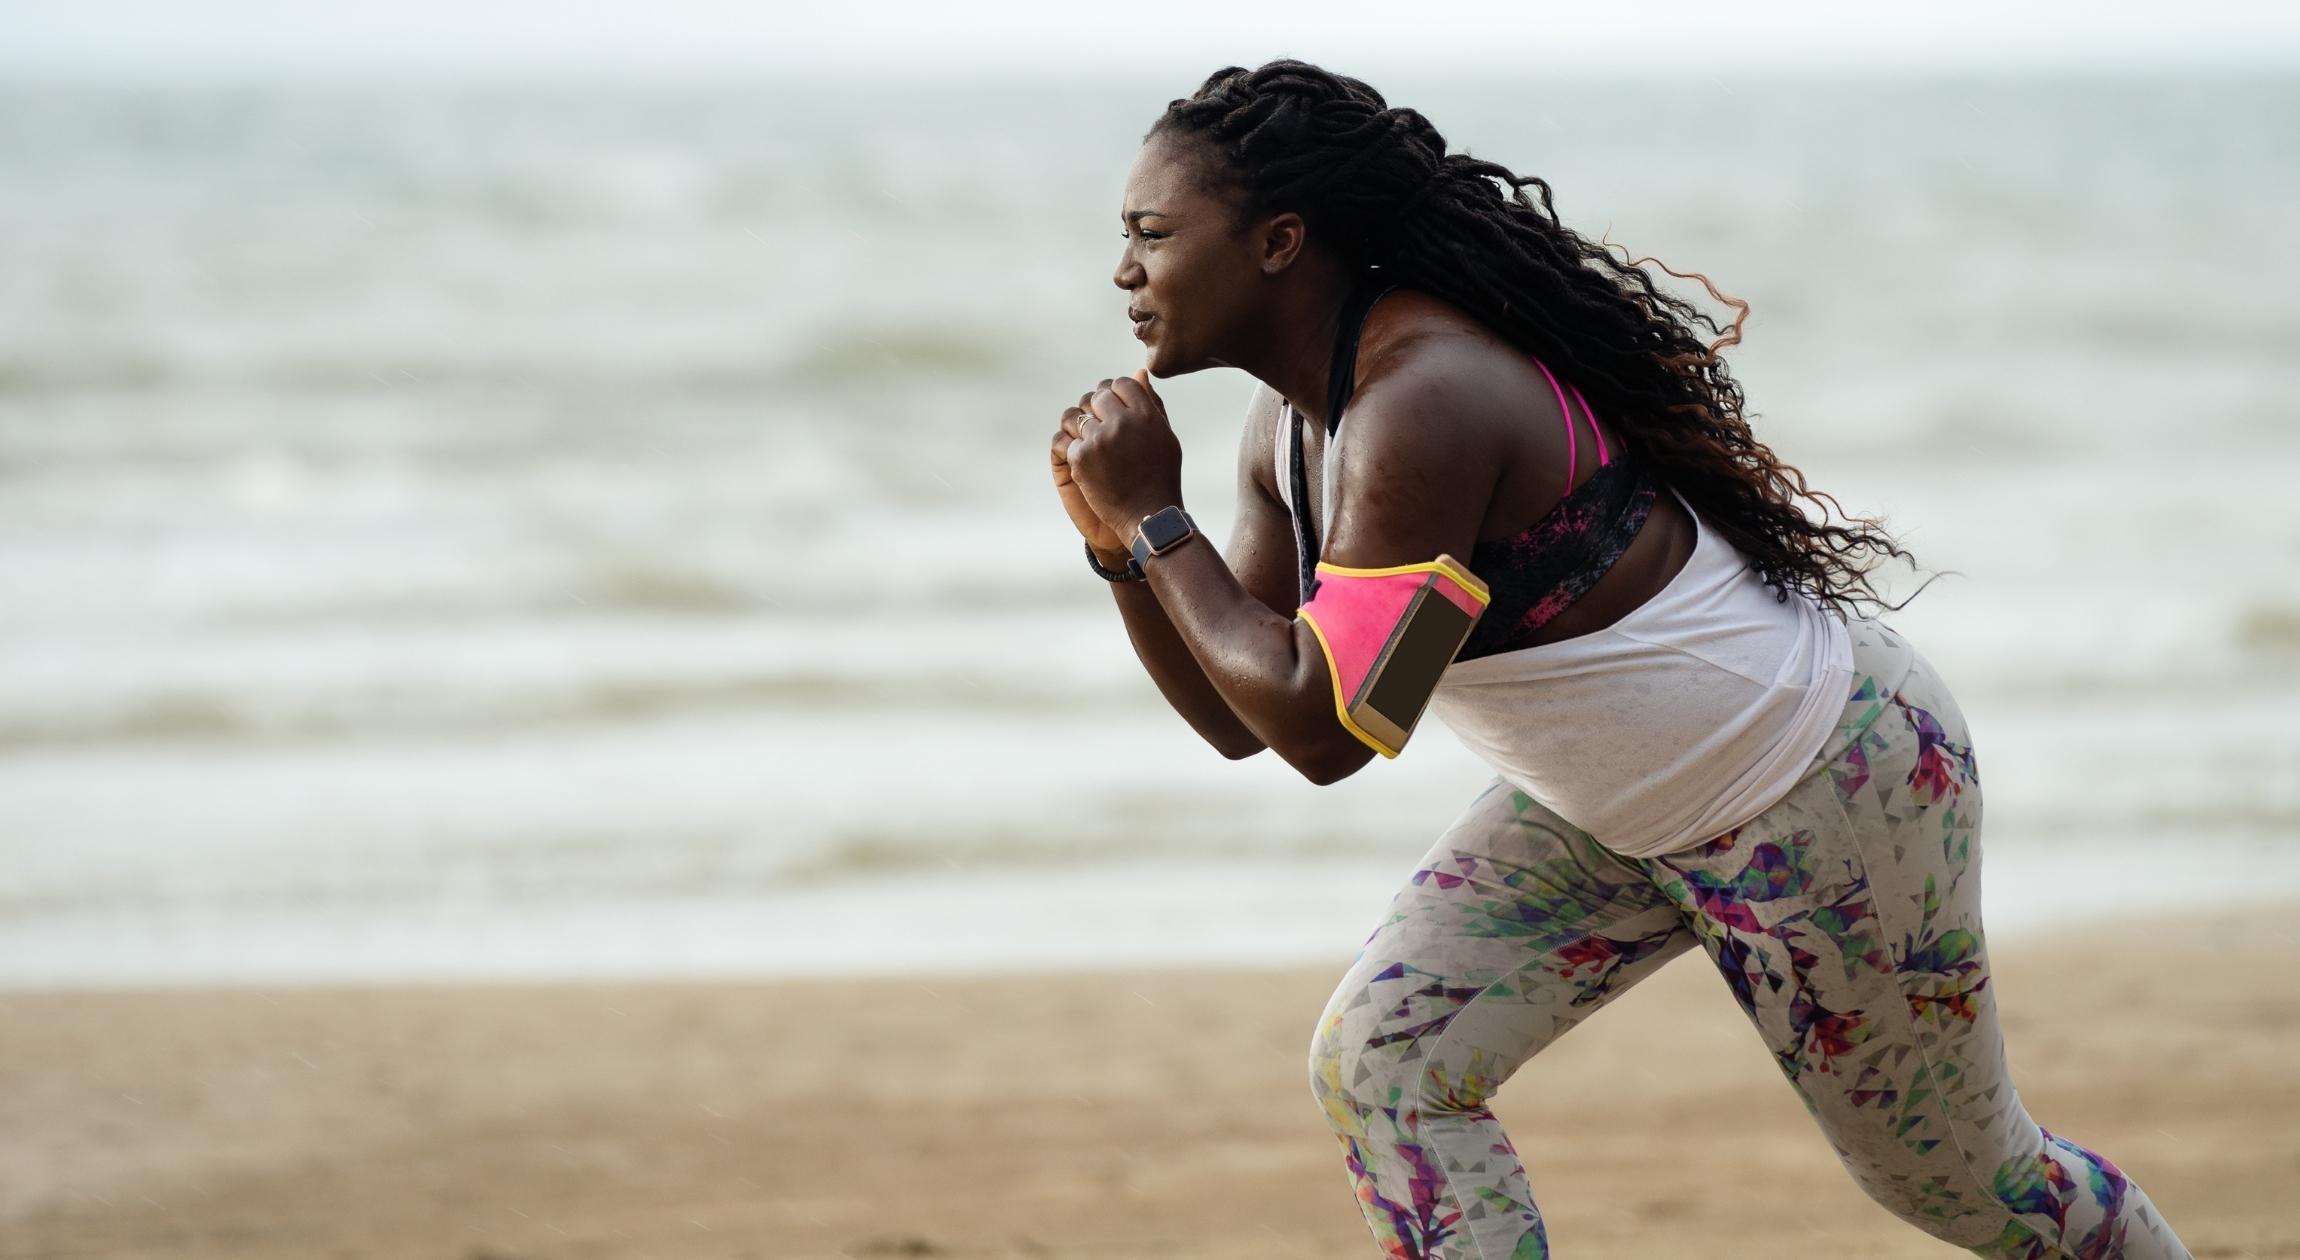 A Black woman in workout attire on the beach